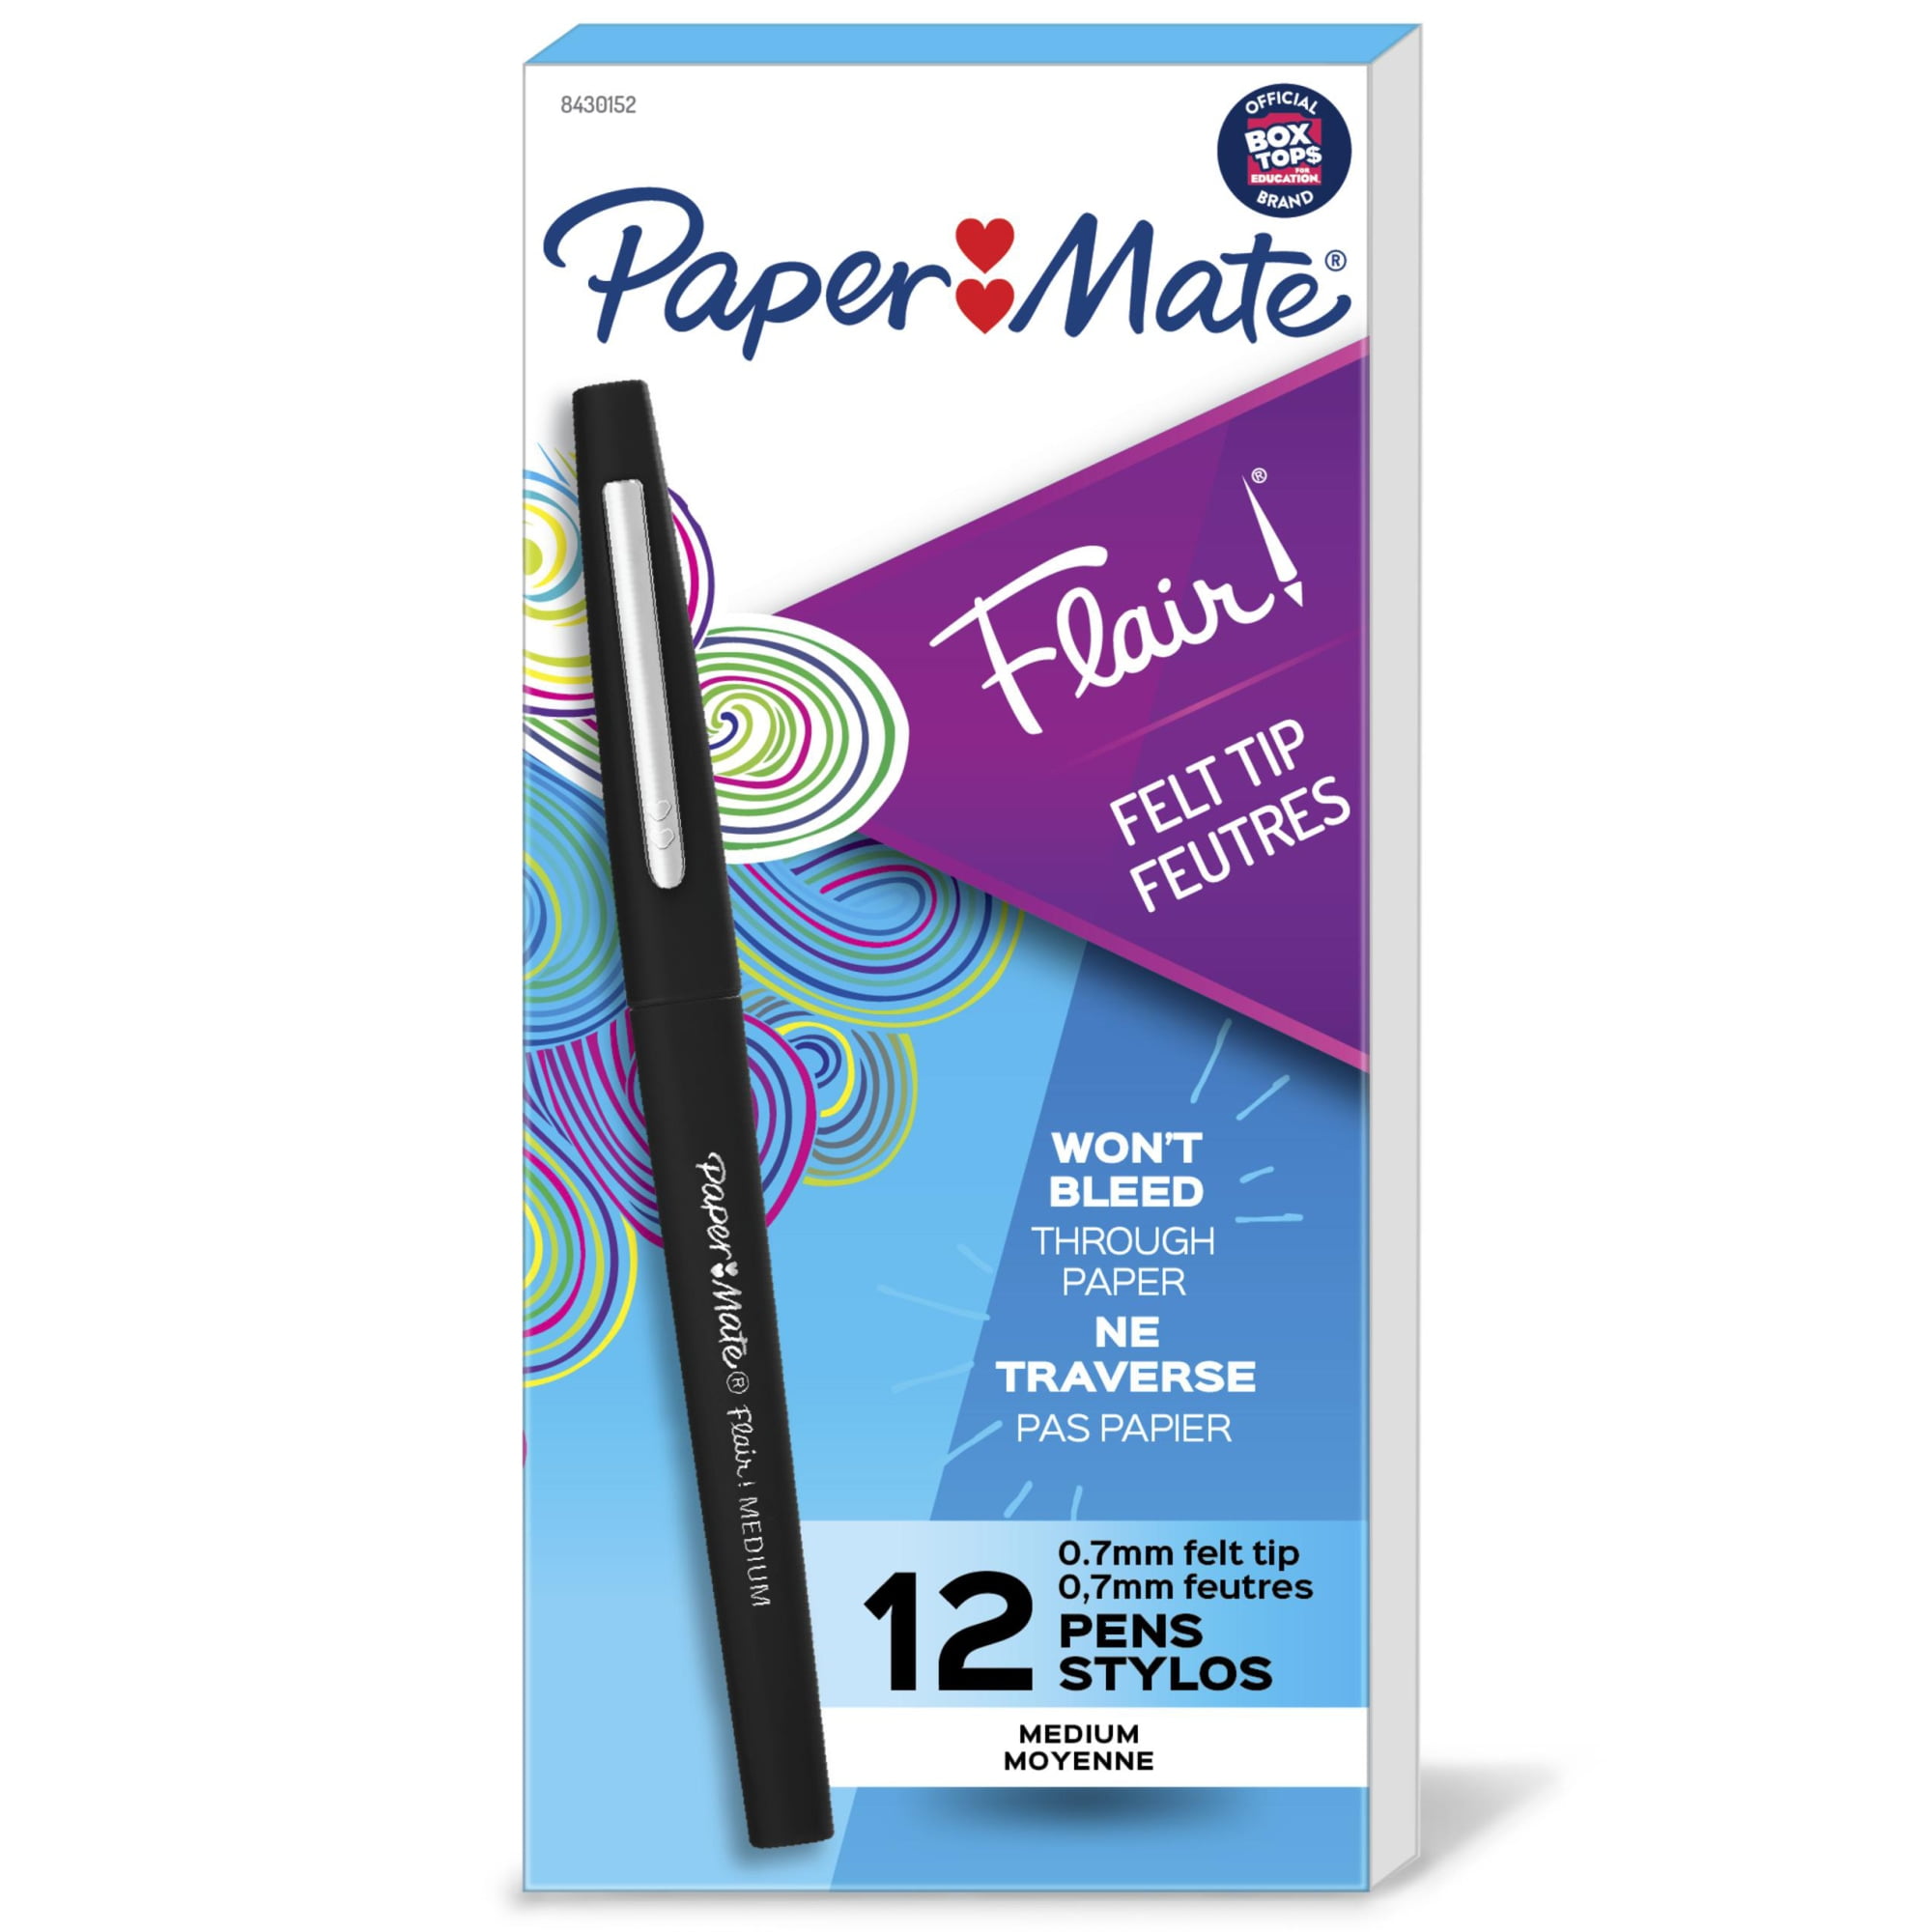 Blue Plastic Flair Inky Gold Liquid Fountain Pen, For Writing